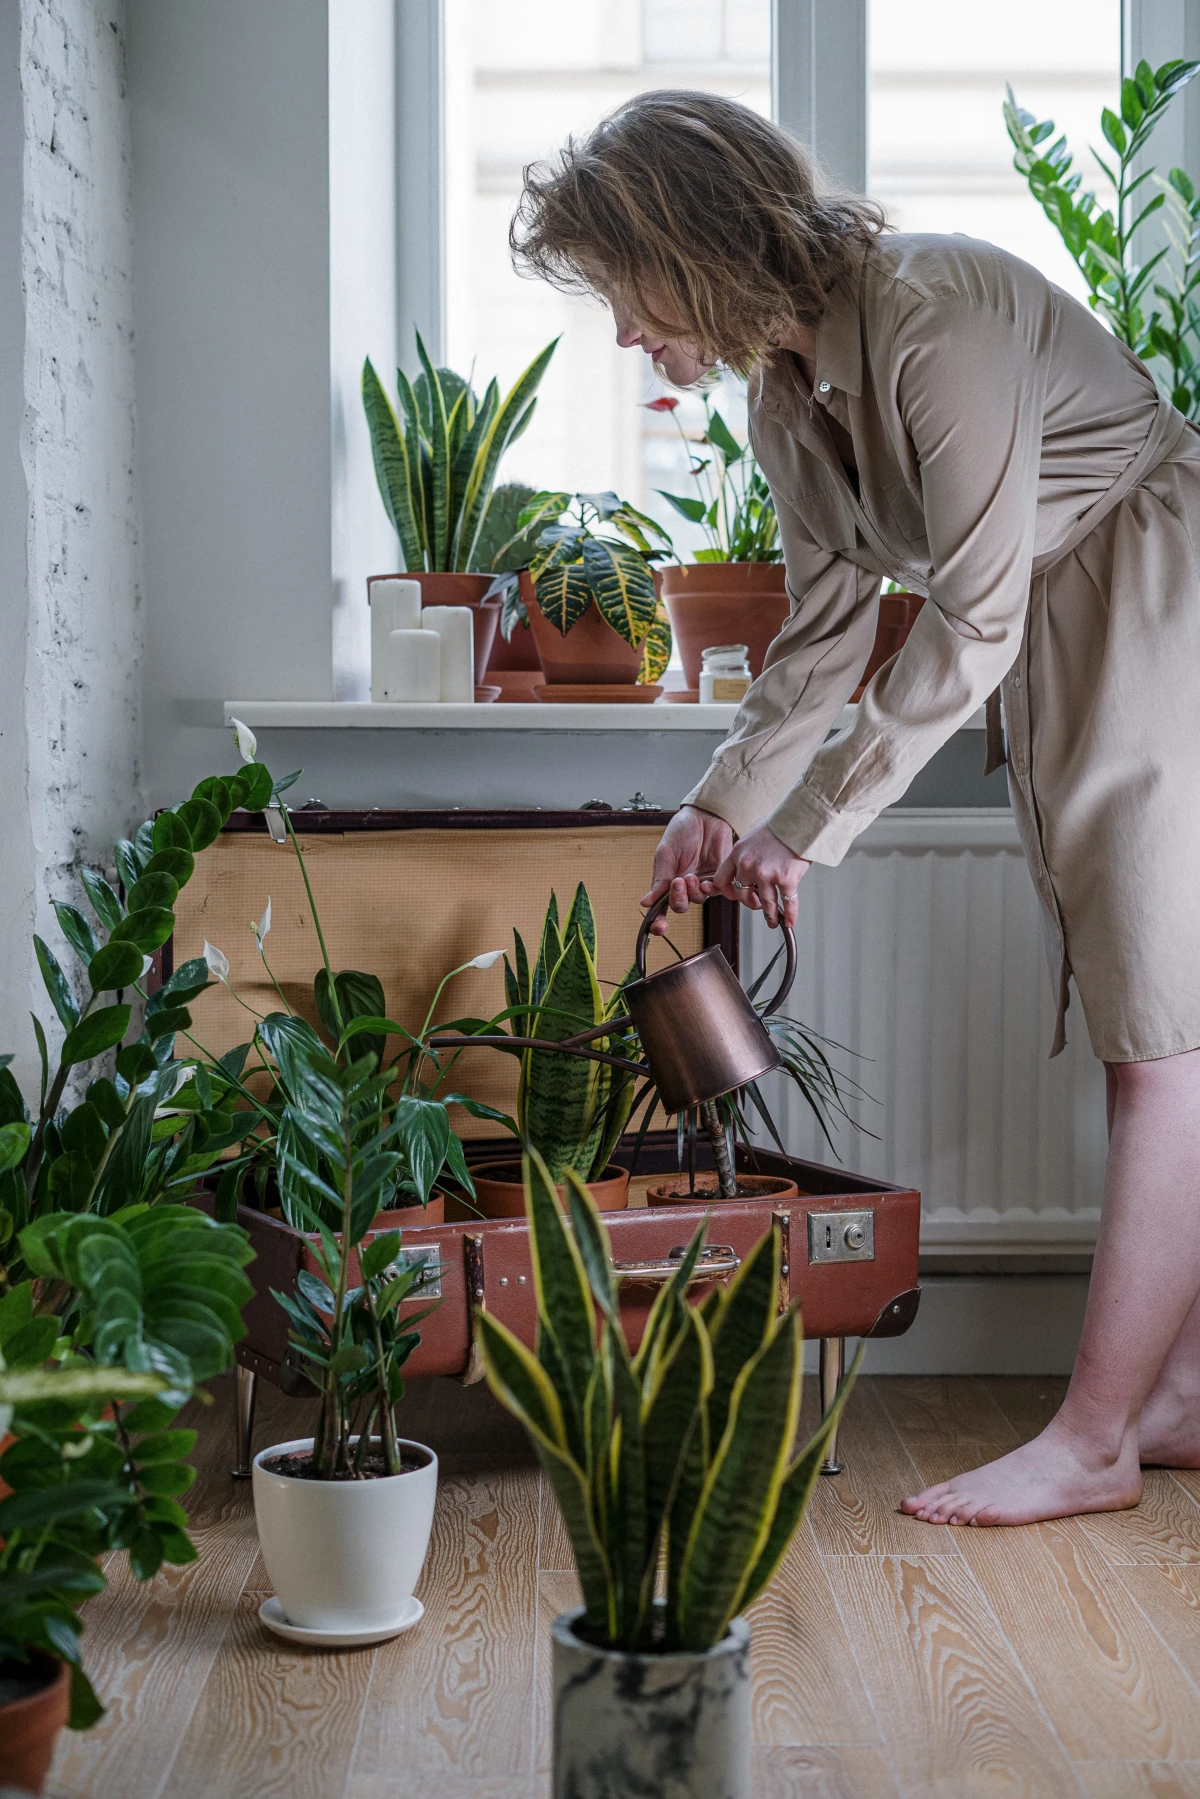 how to water plants while away woman watering plants